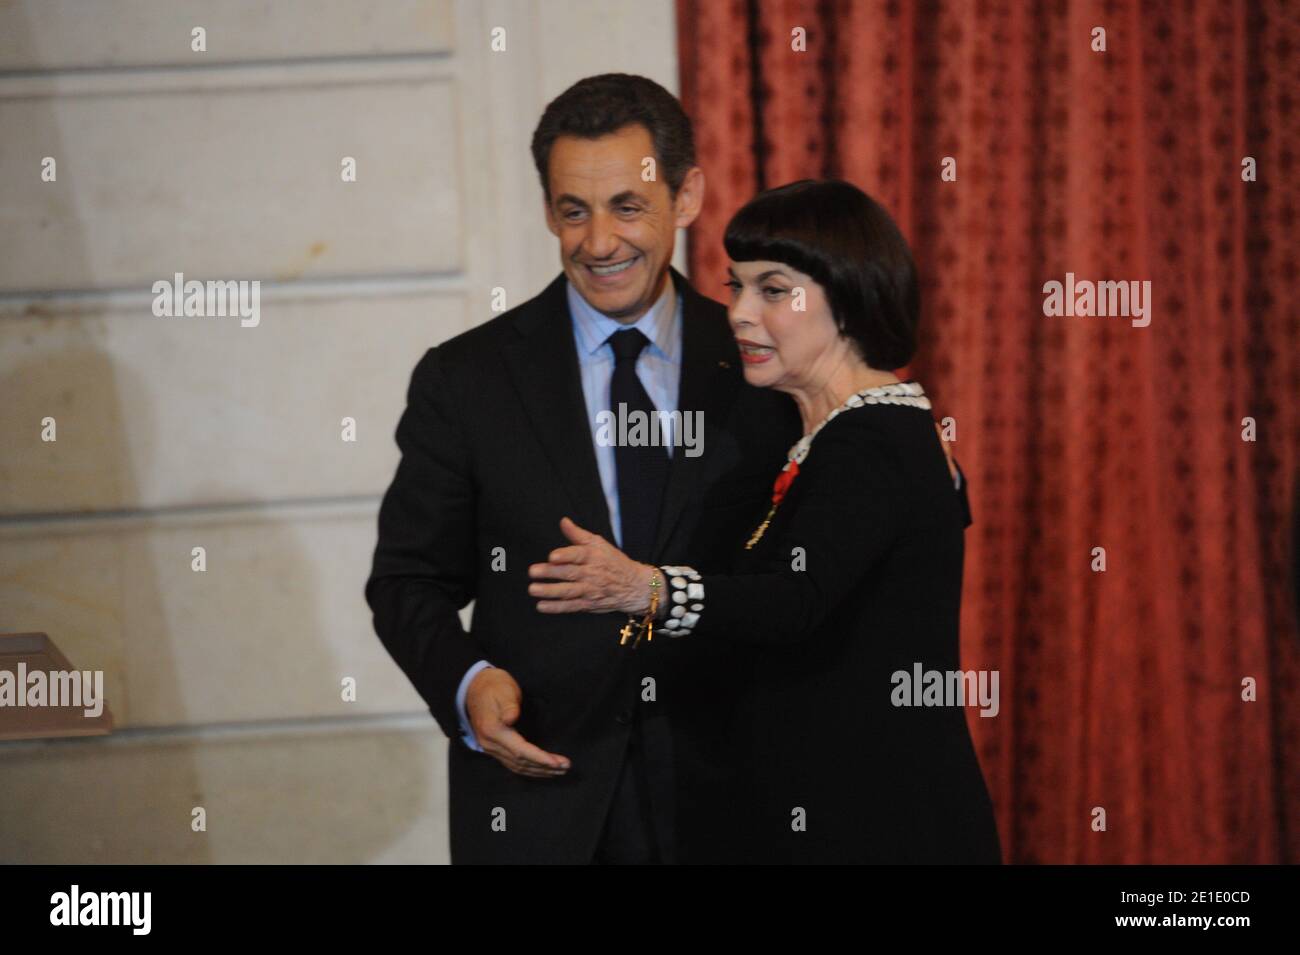 French singer Mireille Mathieu receives the Legion d'Honneur by French President Nicolas Sarkozy at Elysee Palace in Paris, France on January 26, 2011. Photo by Mousse/ABACAPRESS.COM Stock Photo